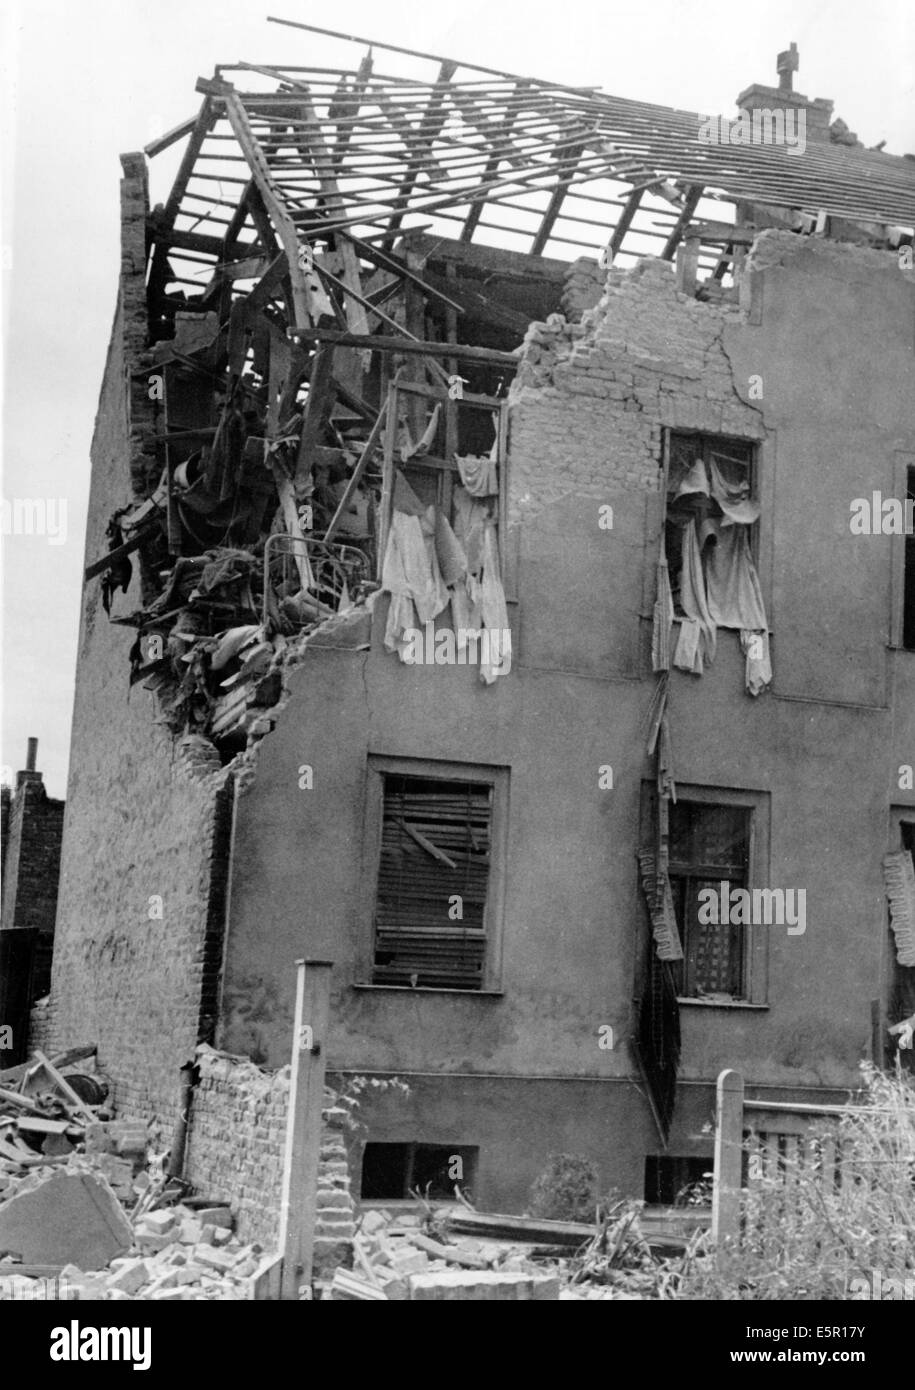 The picture from a Nazi news report shows a destroyed residential building after a British aerial bomb attack in a outer neighborhood of Berlin, Germany, September 1940. Photo: Berliner Verlag / Archive - NO WIRE SERVICE Stock Photo